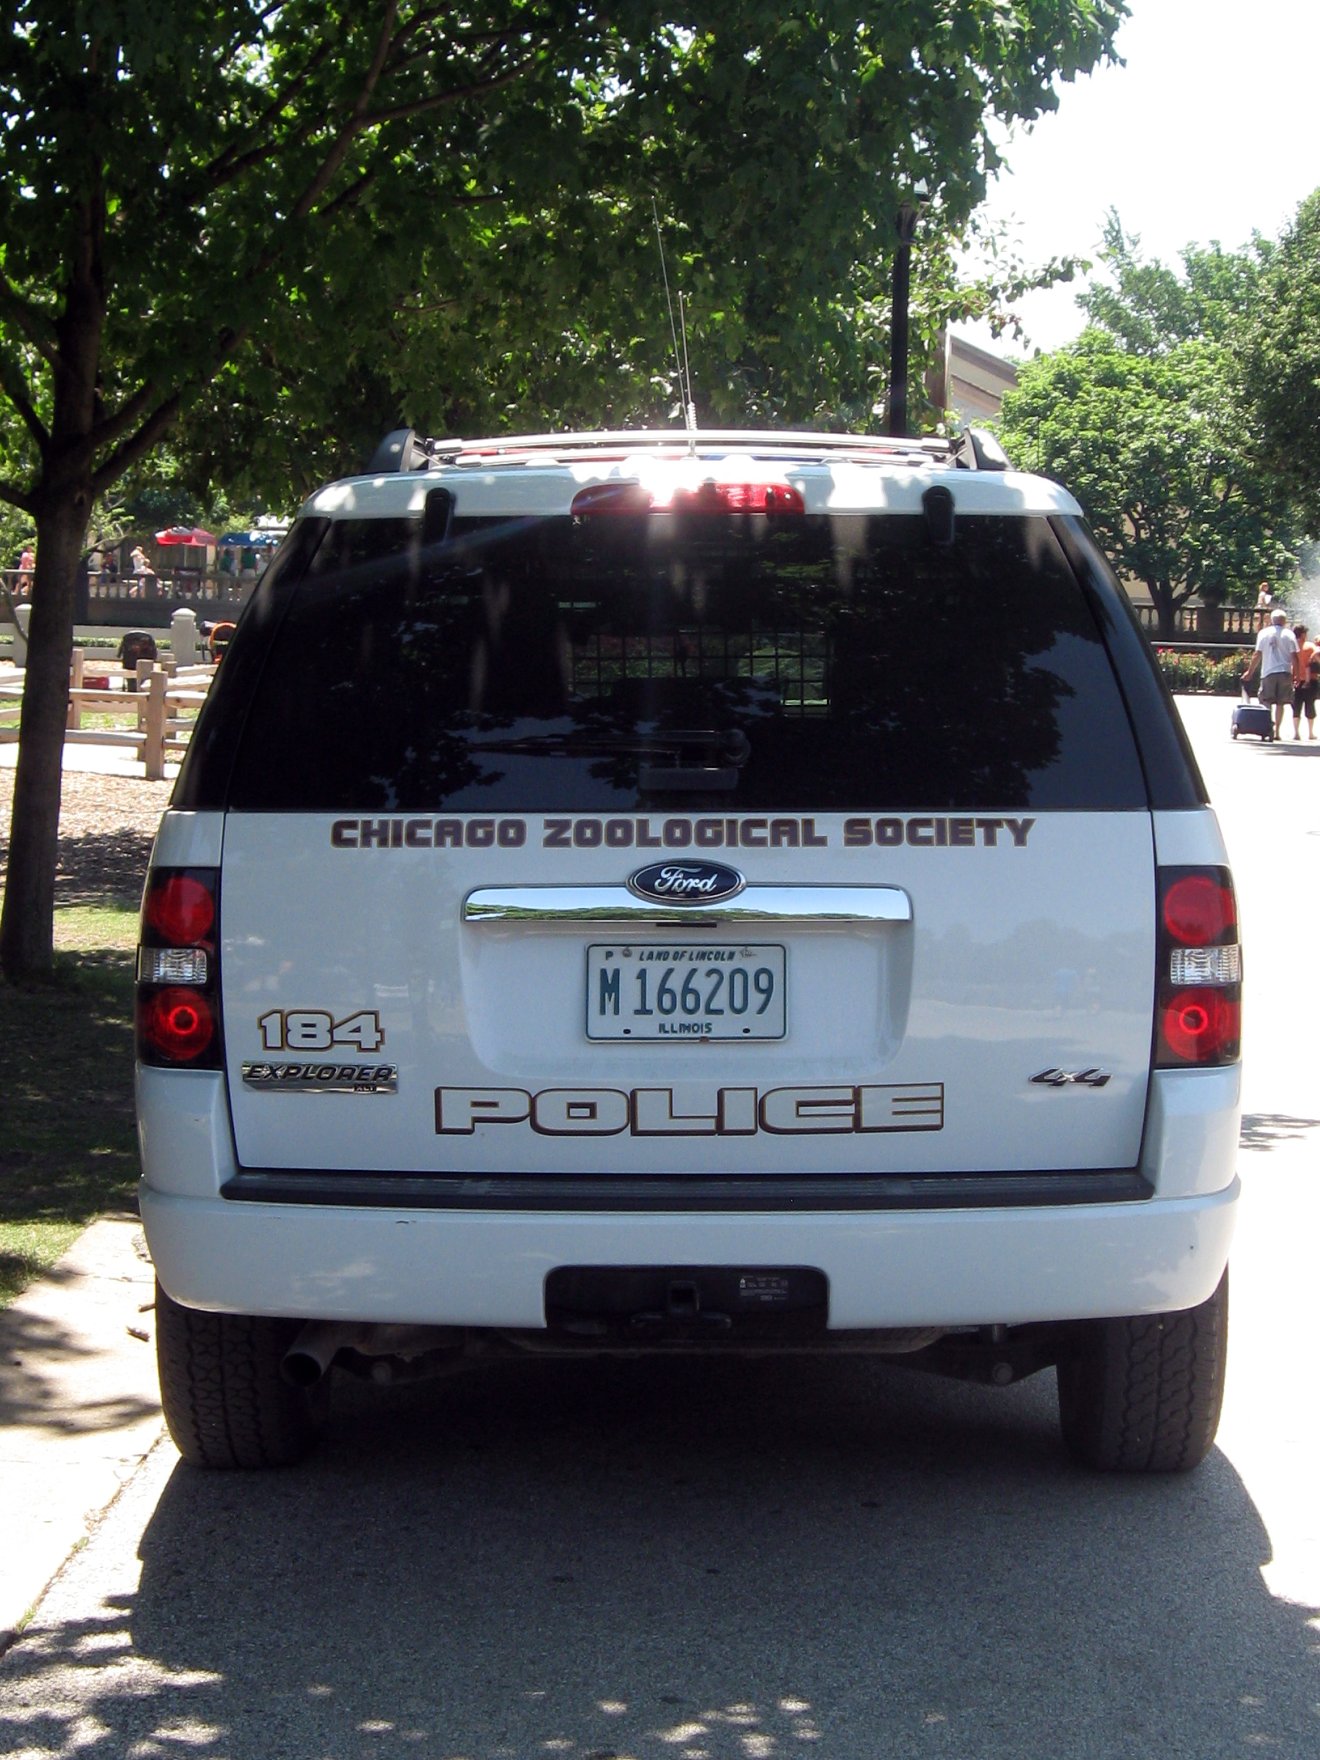 IL - Chicago Zoological Society Police Department